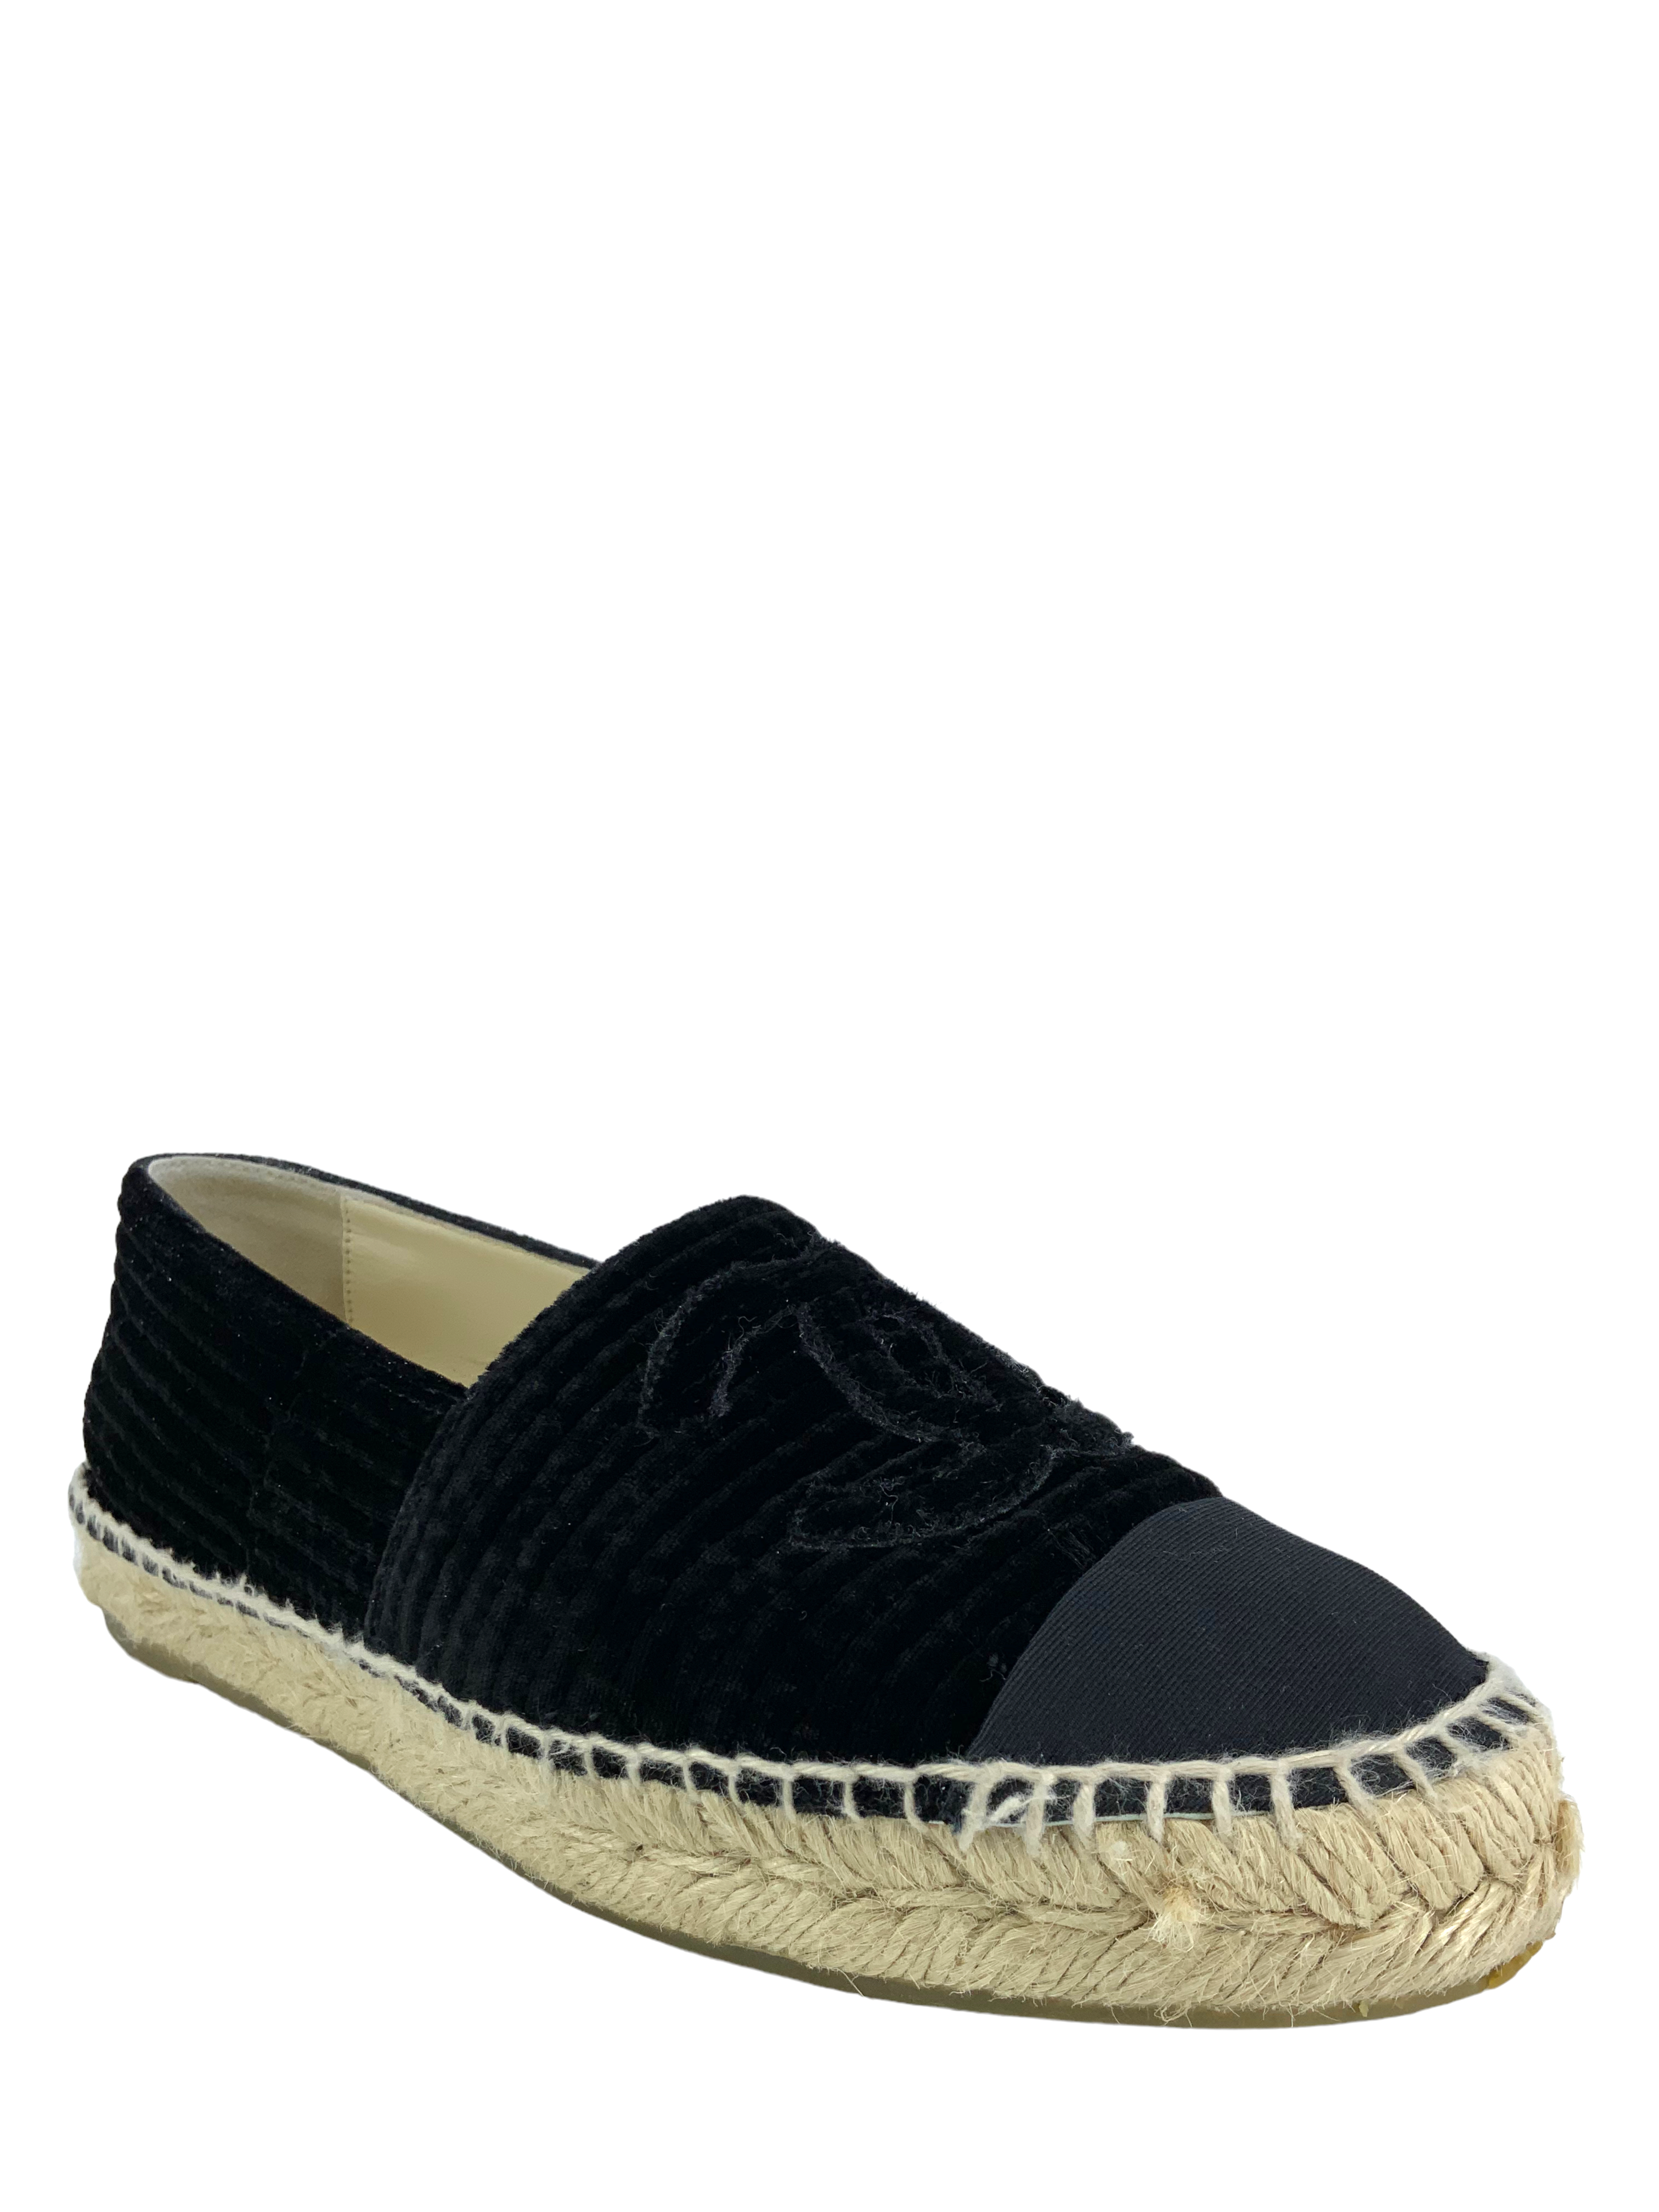 CHANEL Quilted Velvet CC Espadrilles Size 6 - Consigned Designs